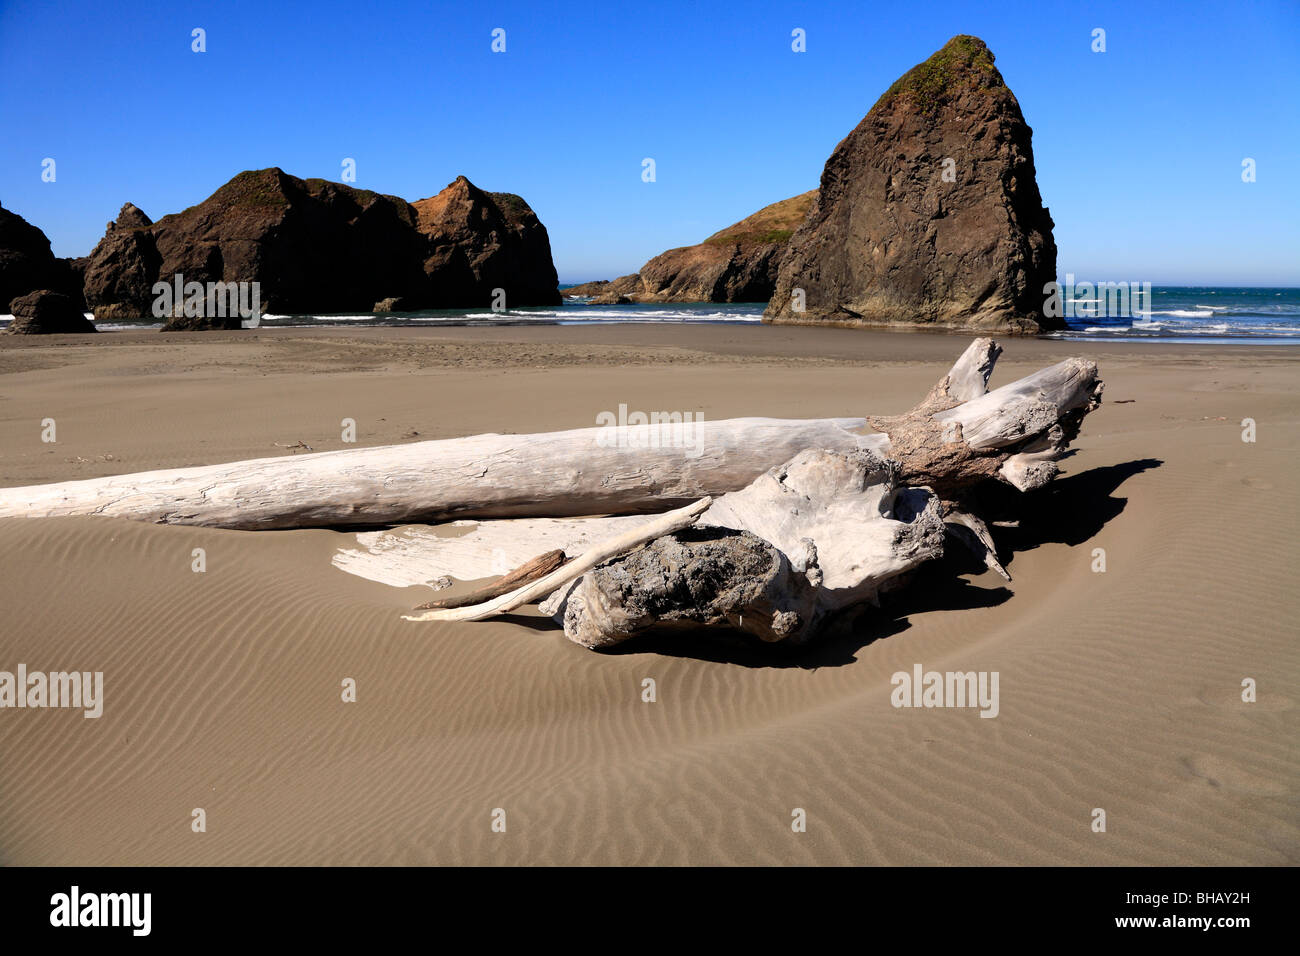 Drift Logs washed ashore on beach with sea stacks and rocky shores at Meyers Creek beach, Oregon, USA Stock Photo